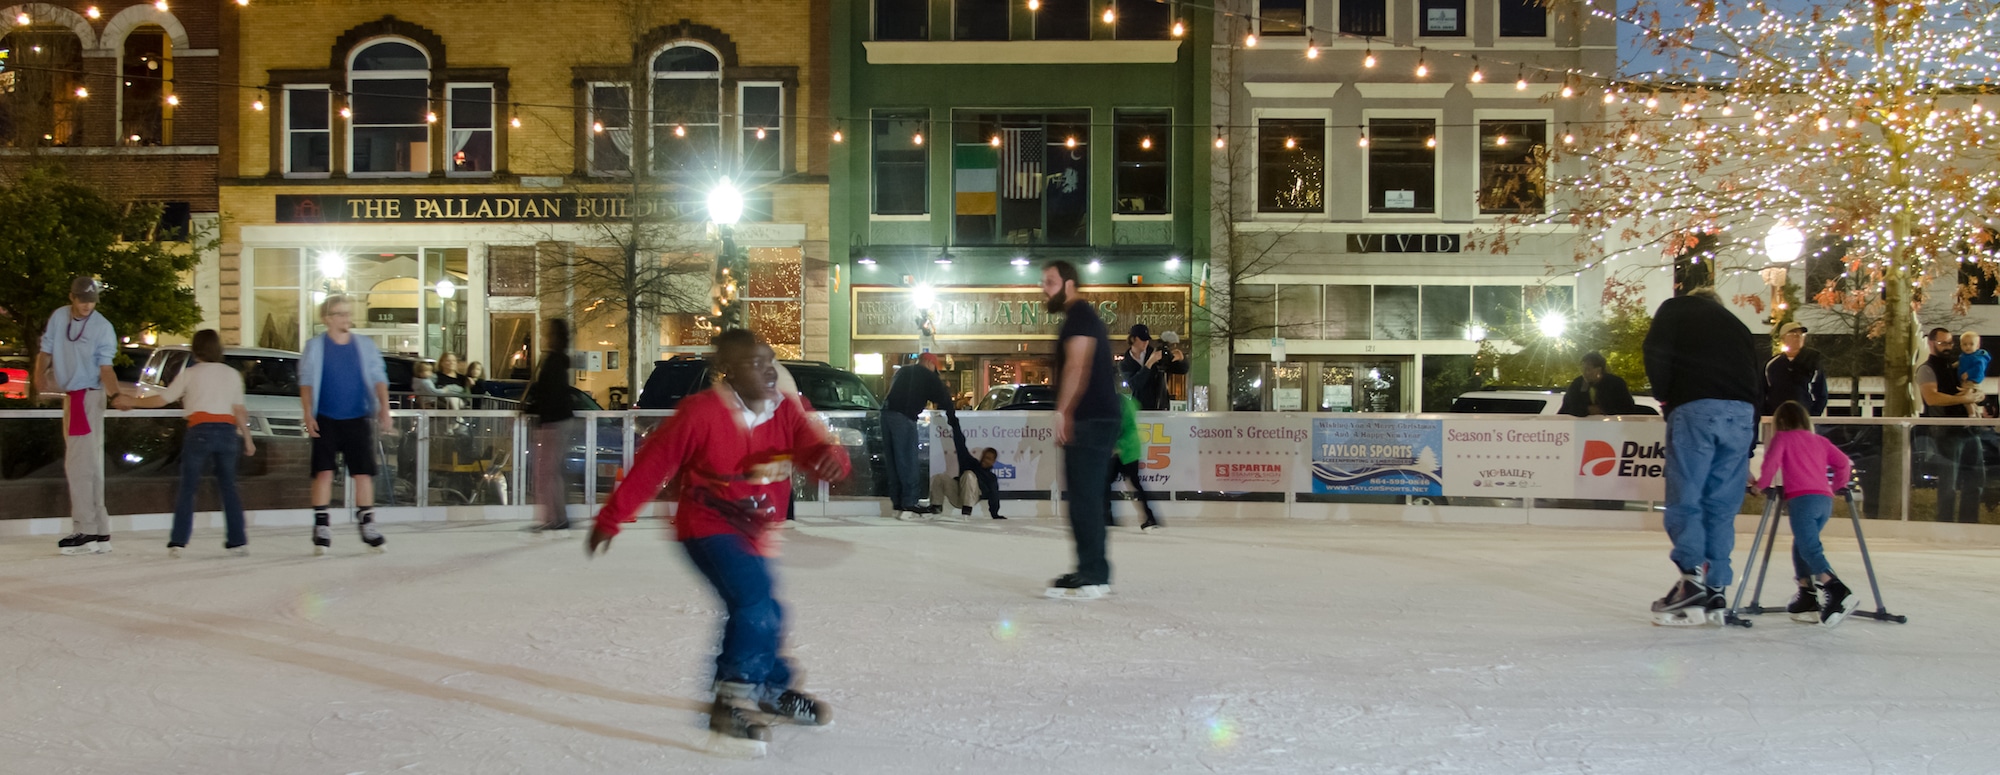 Skating on the Square